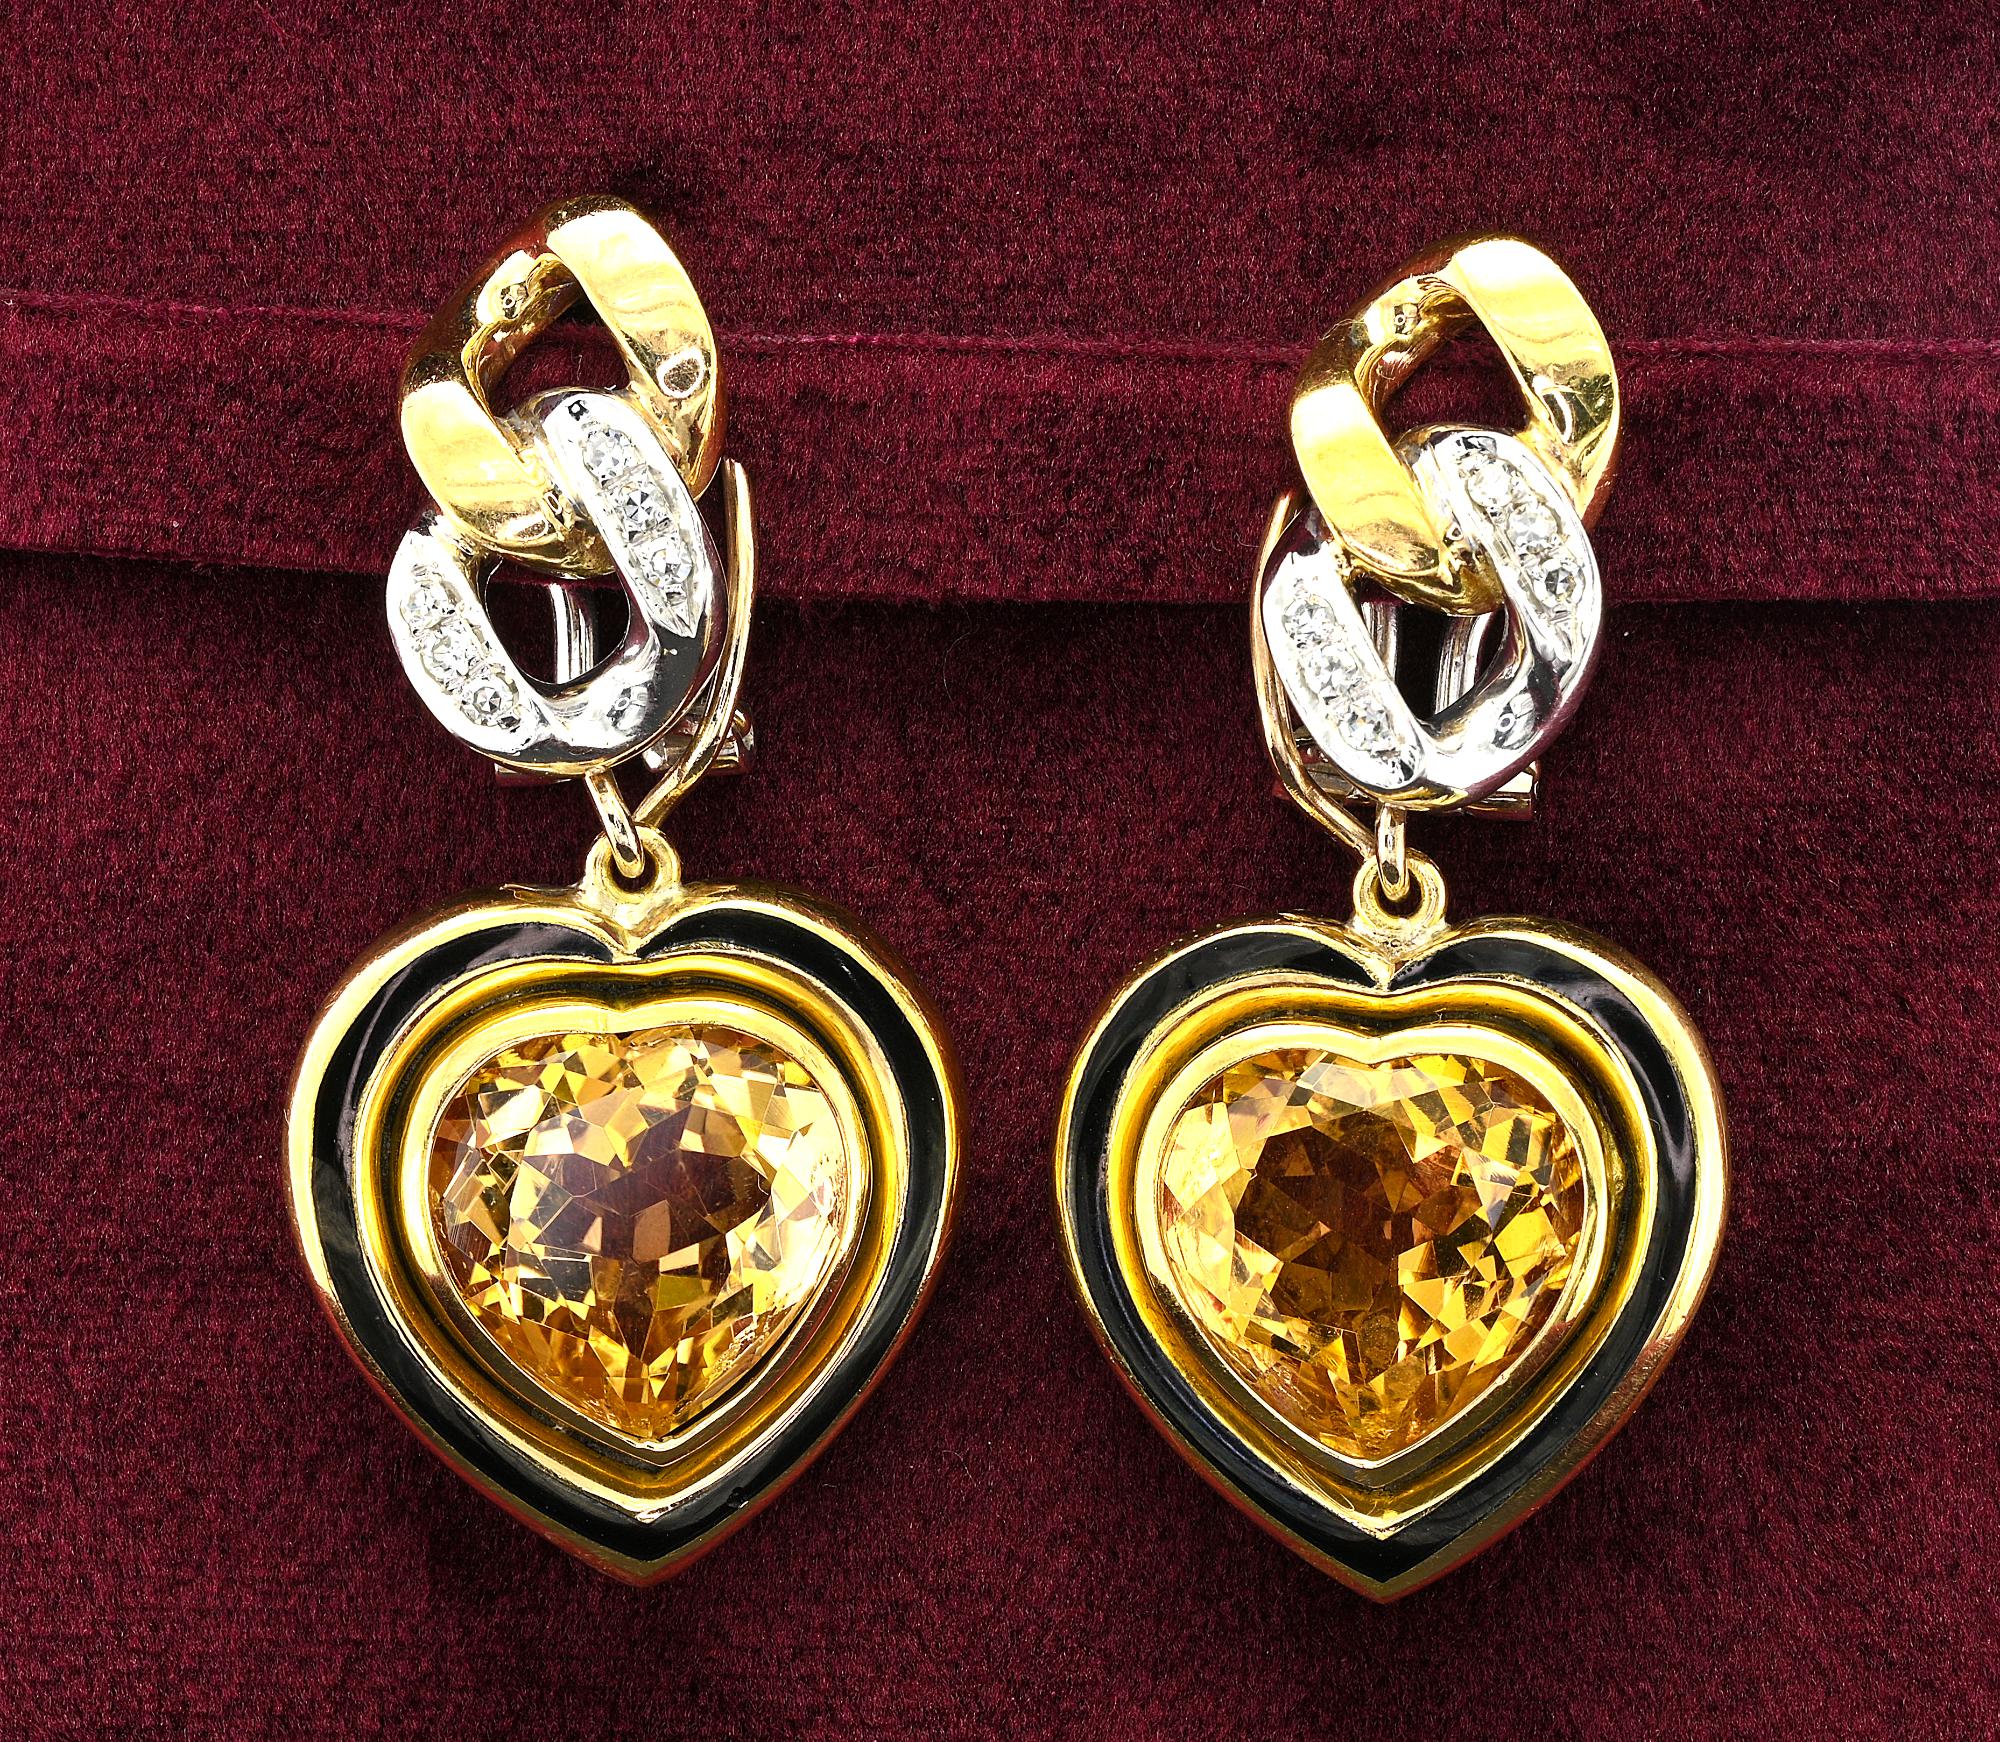 These beautiful estate earrings are 1975 circa, Italian origin, 18 KT gold made
They were matched to a striking necklace separately listed
Earrings have a dynamic chic design, with a curb link chain top motif set with Diamonds on the white gold